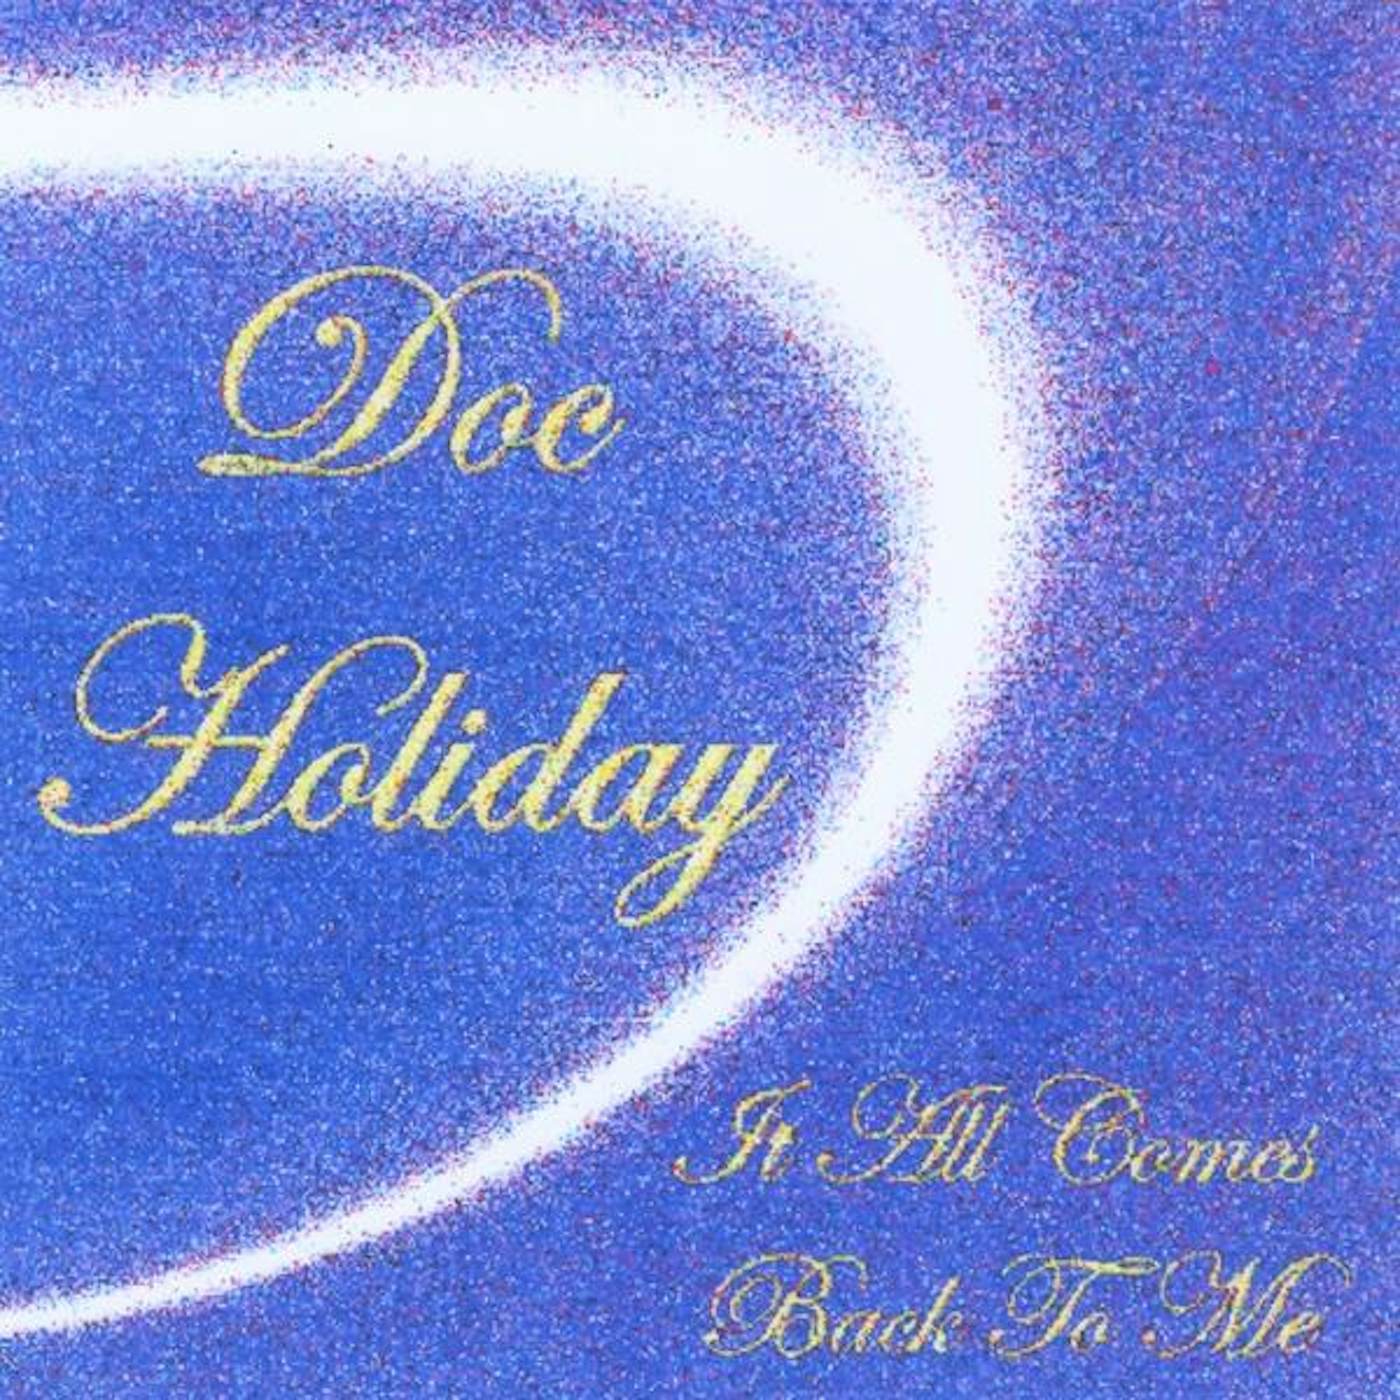 Doc Holiday IT ALL COMES BACK TO ME CD